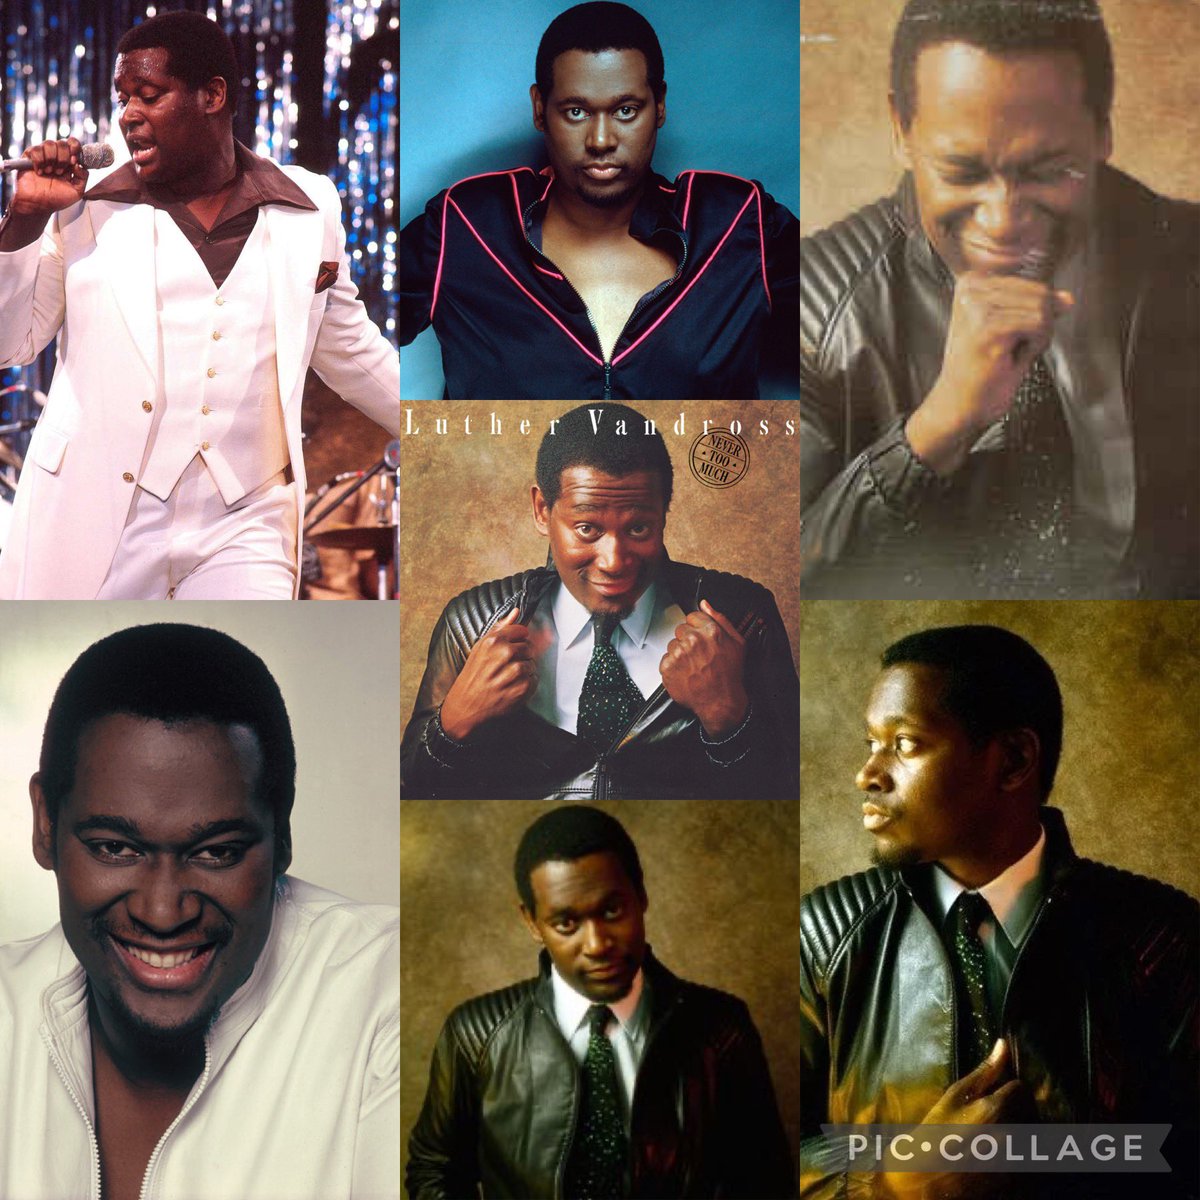 40 Years Ago Today in 1981 @luthervandross released his solo debut album Never Too Much #NeverTooMuch40 #40Years #80sRnB #80sMusic #RIPLutherVandross